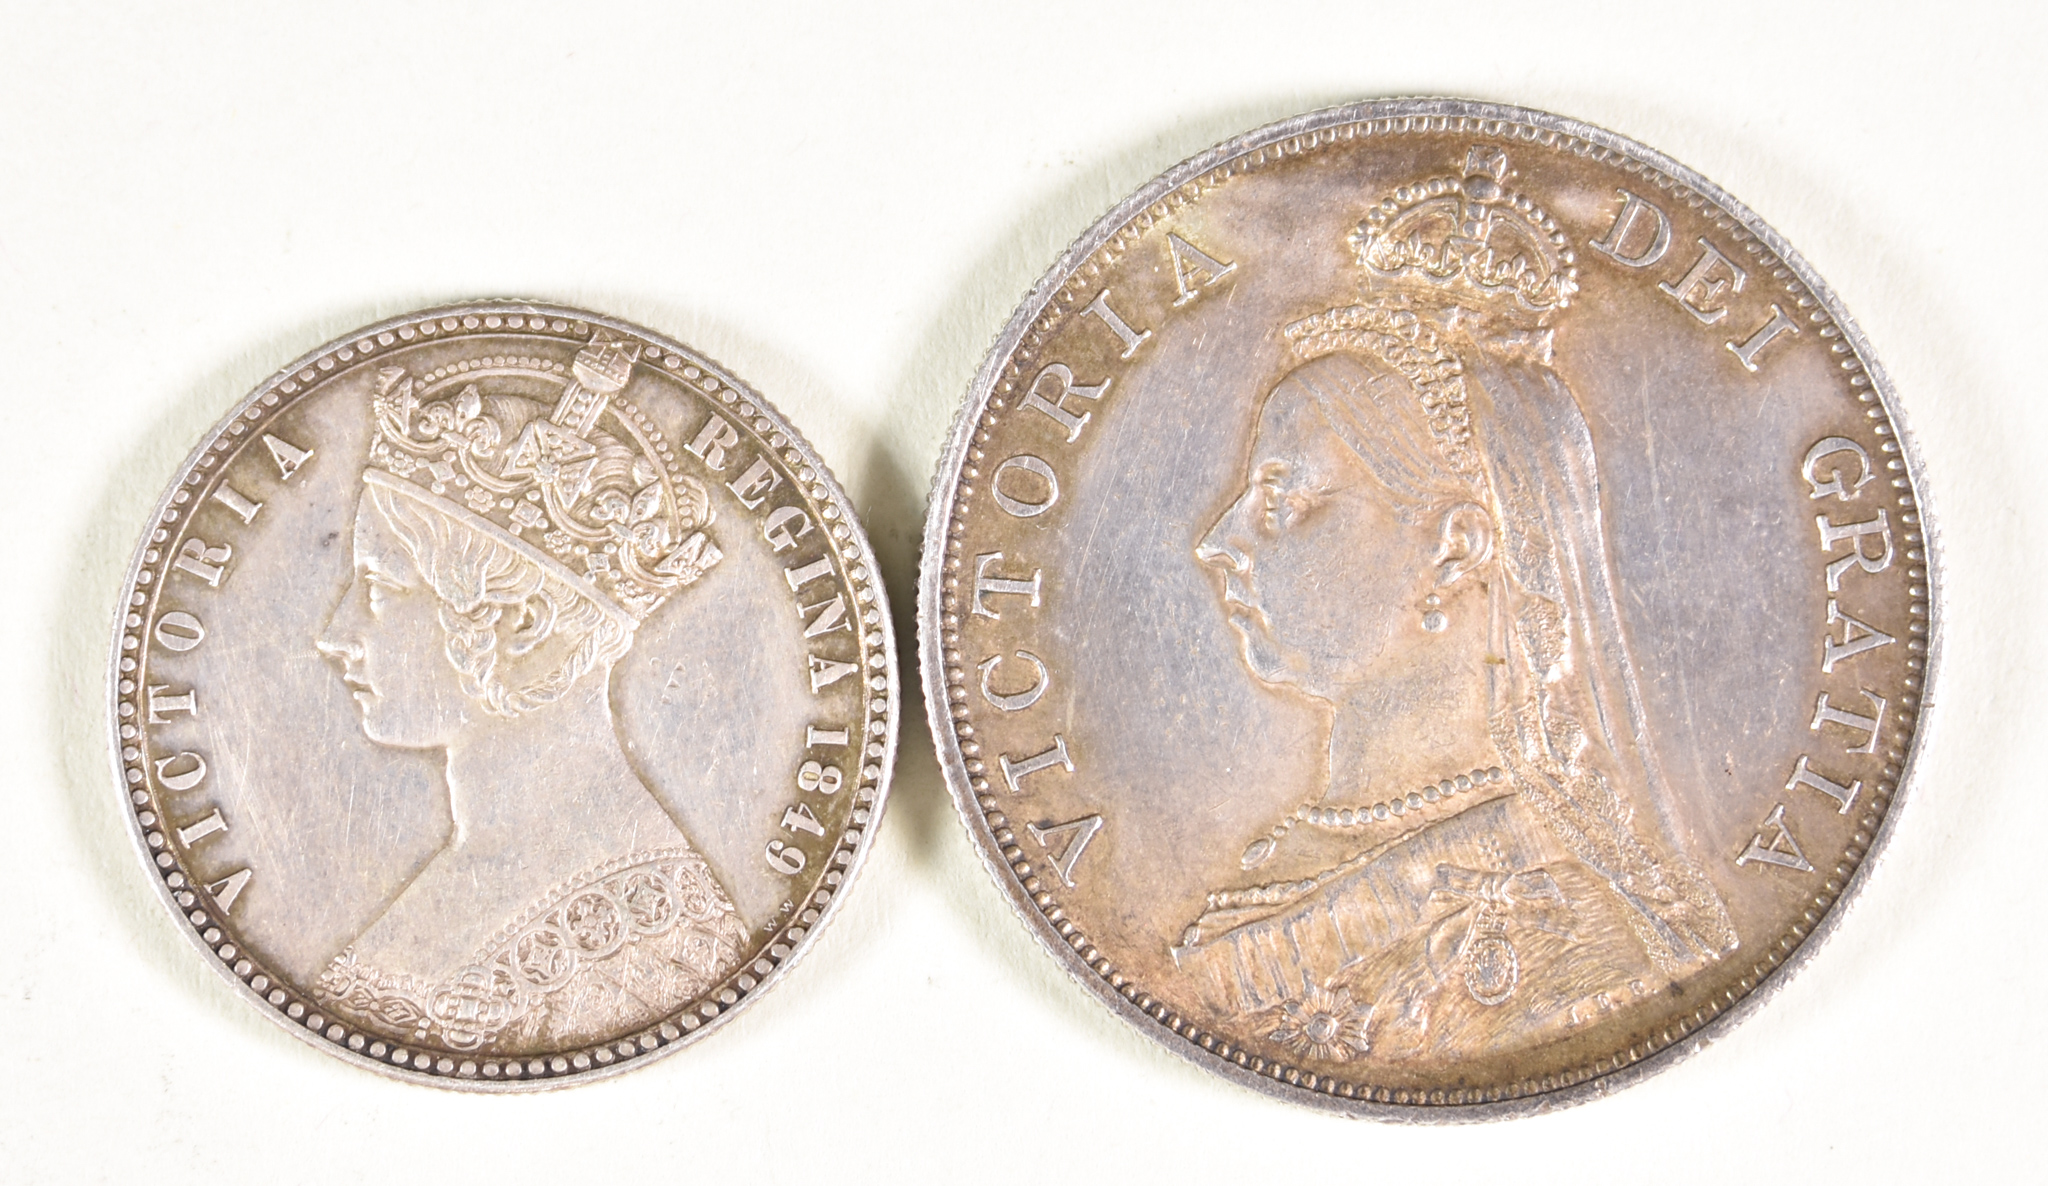 One Victoria Florin, 1849, and one double florin, 1887